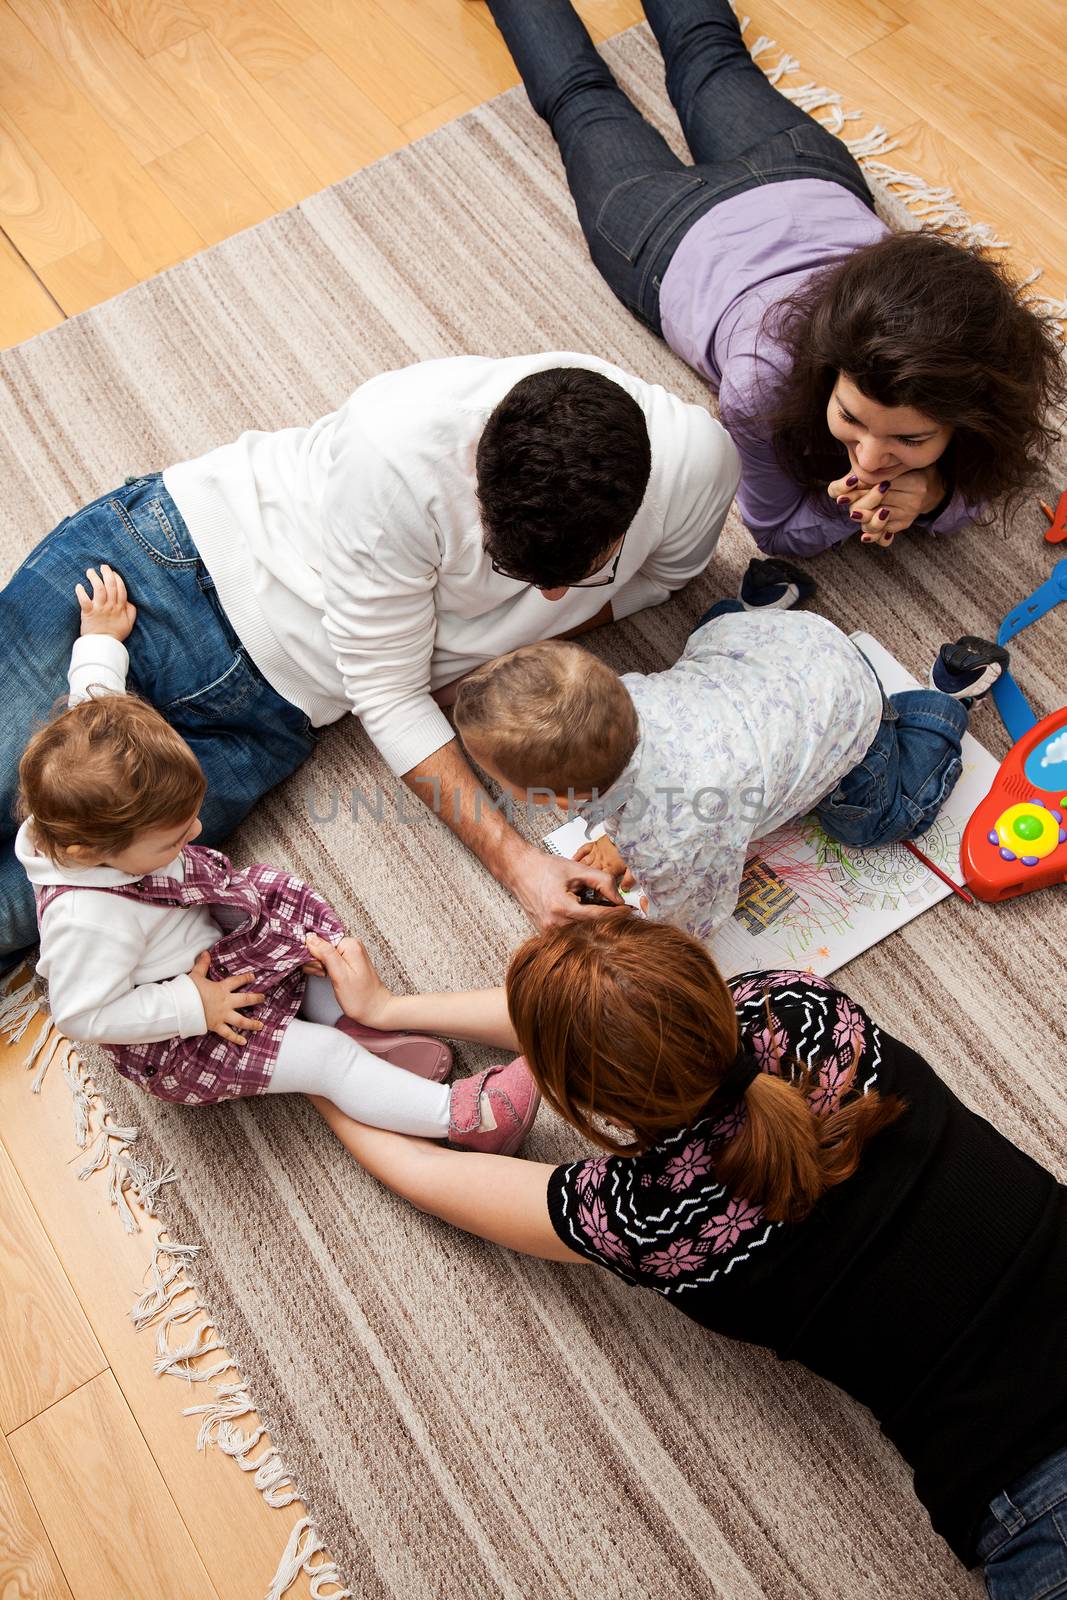 family group of five - two babies and three adults lying on the carpet, playing together.